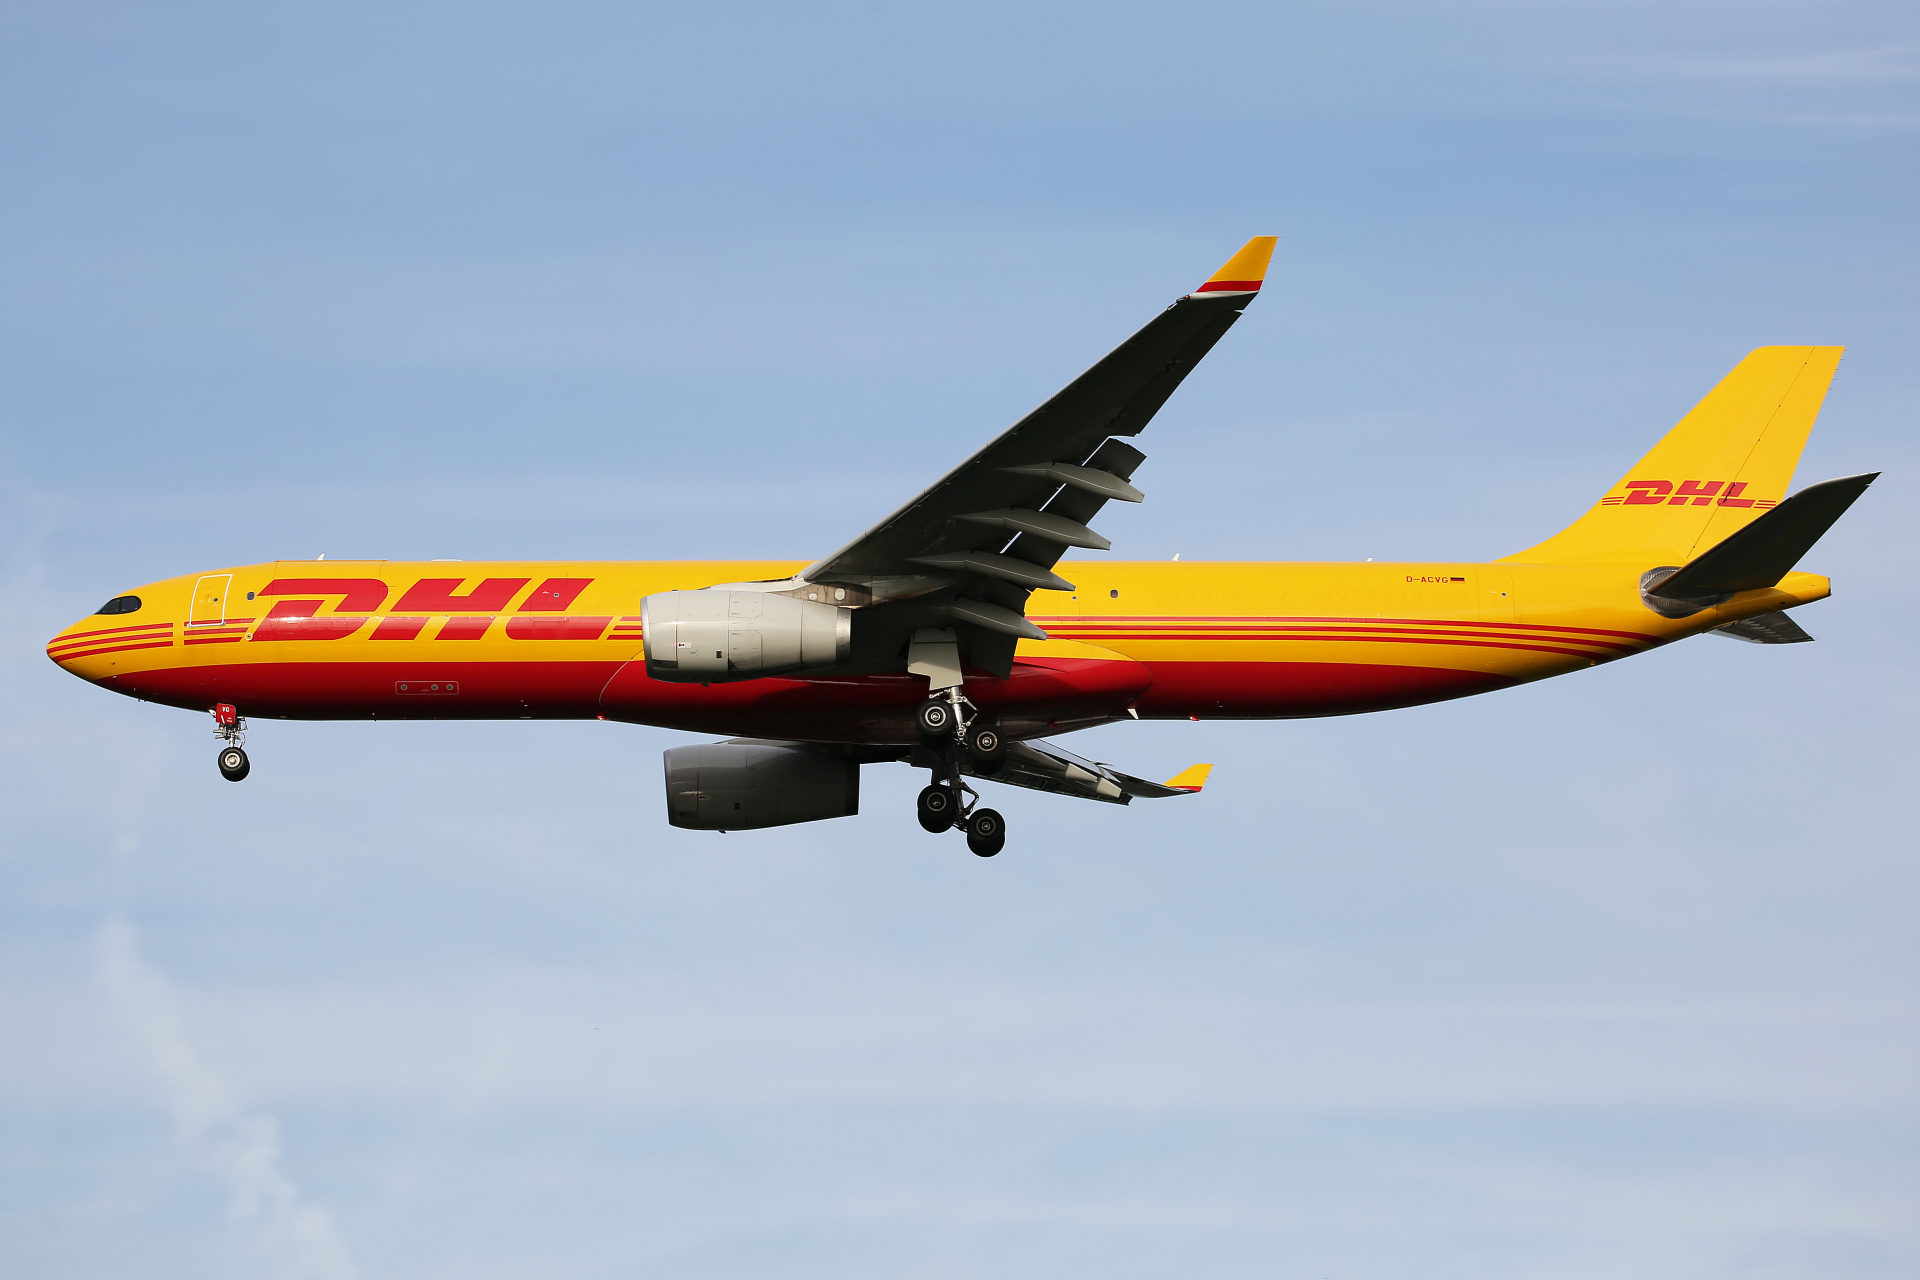 D-ACVG, DHL (EAT Leipzig) (Aircraft » Schiphol Spotting » Airbus A330-300P2F)